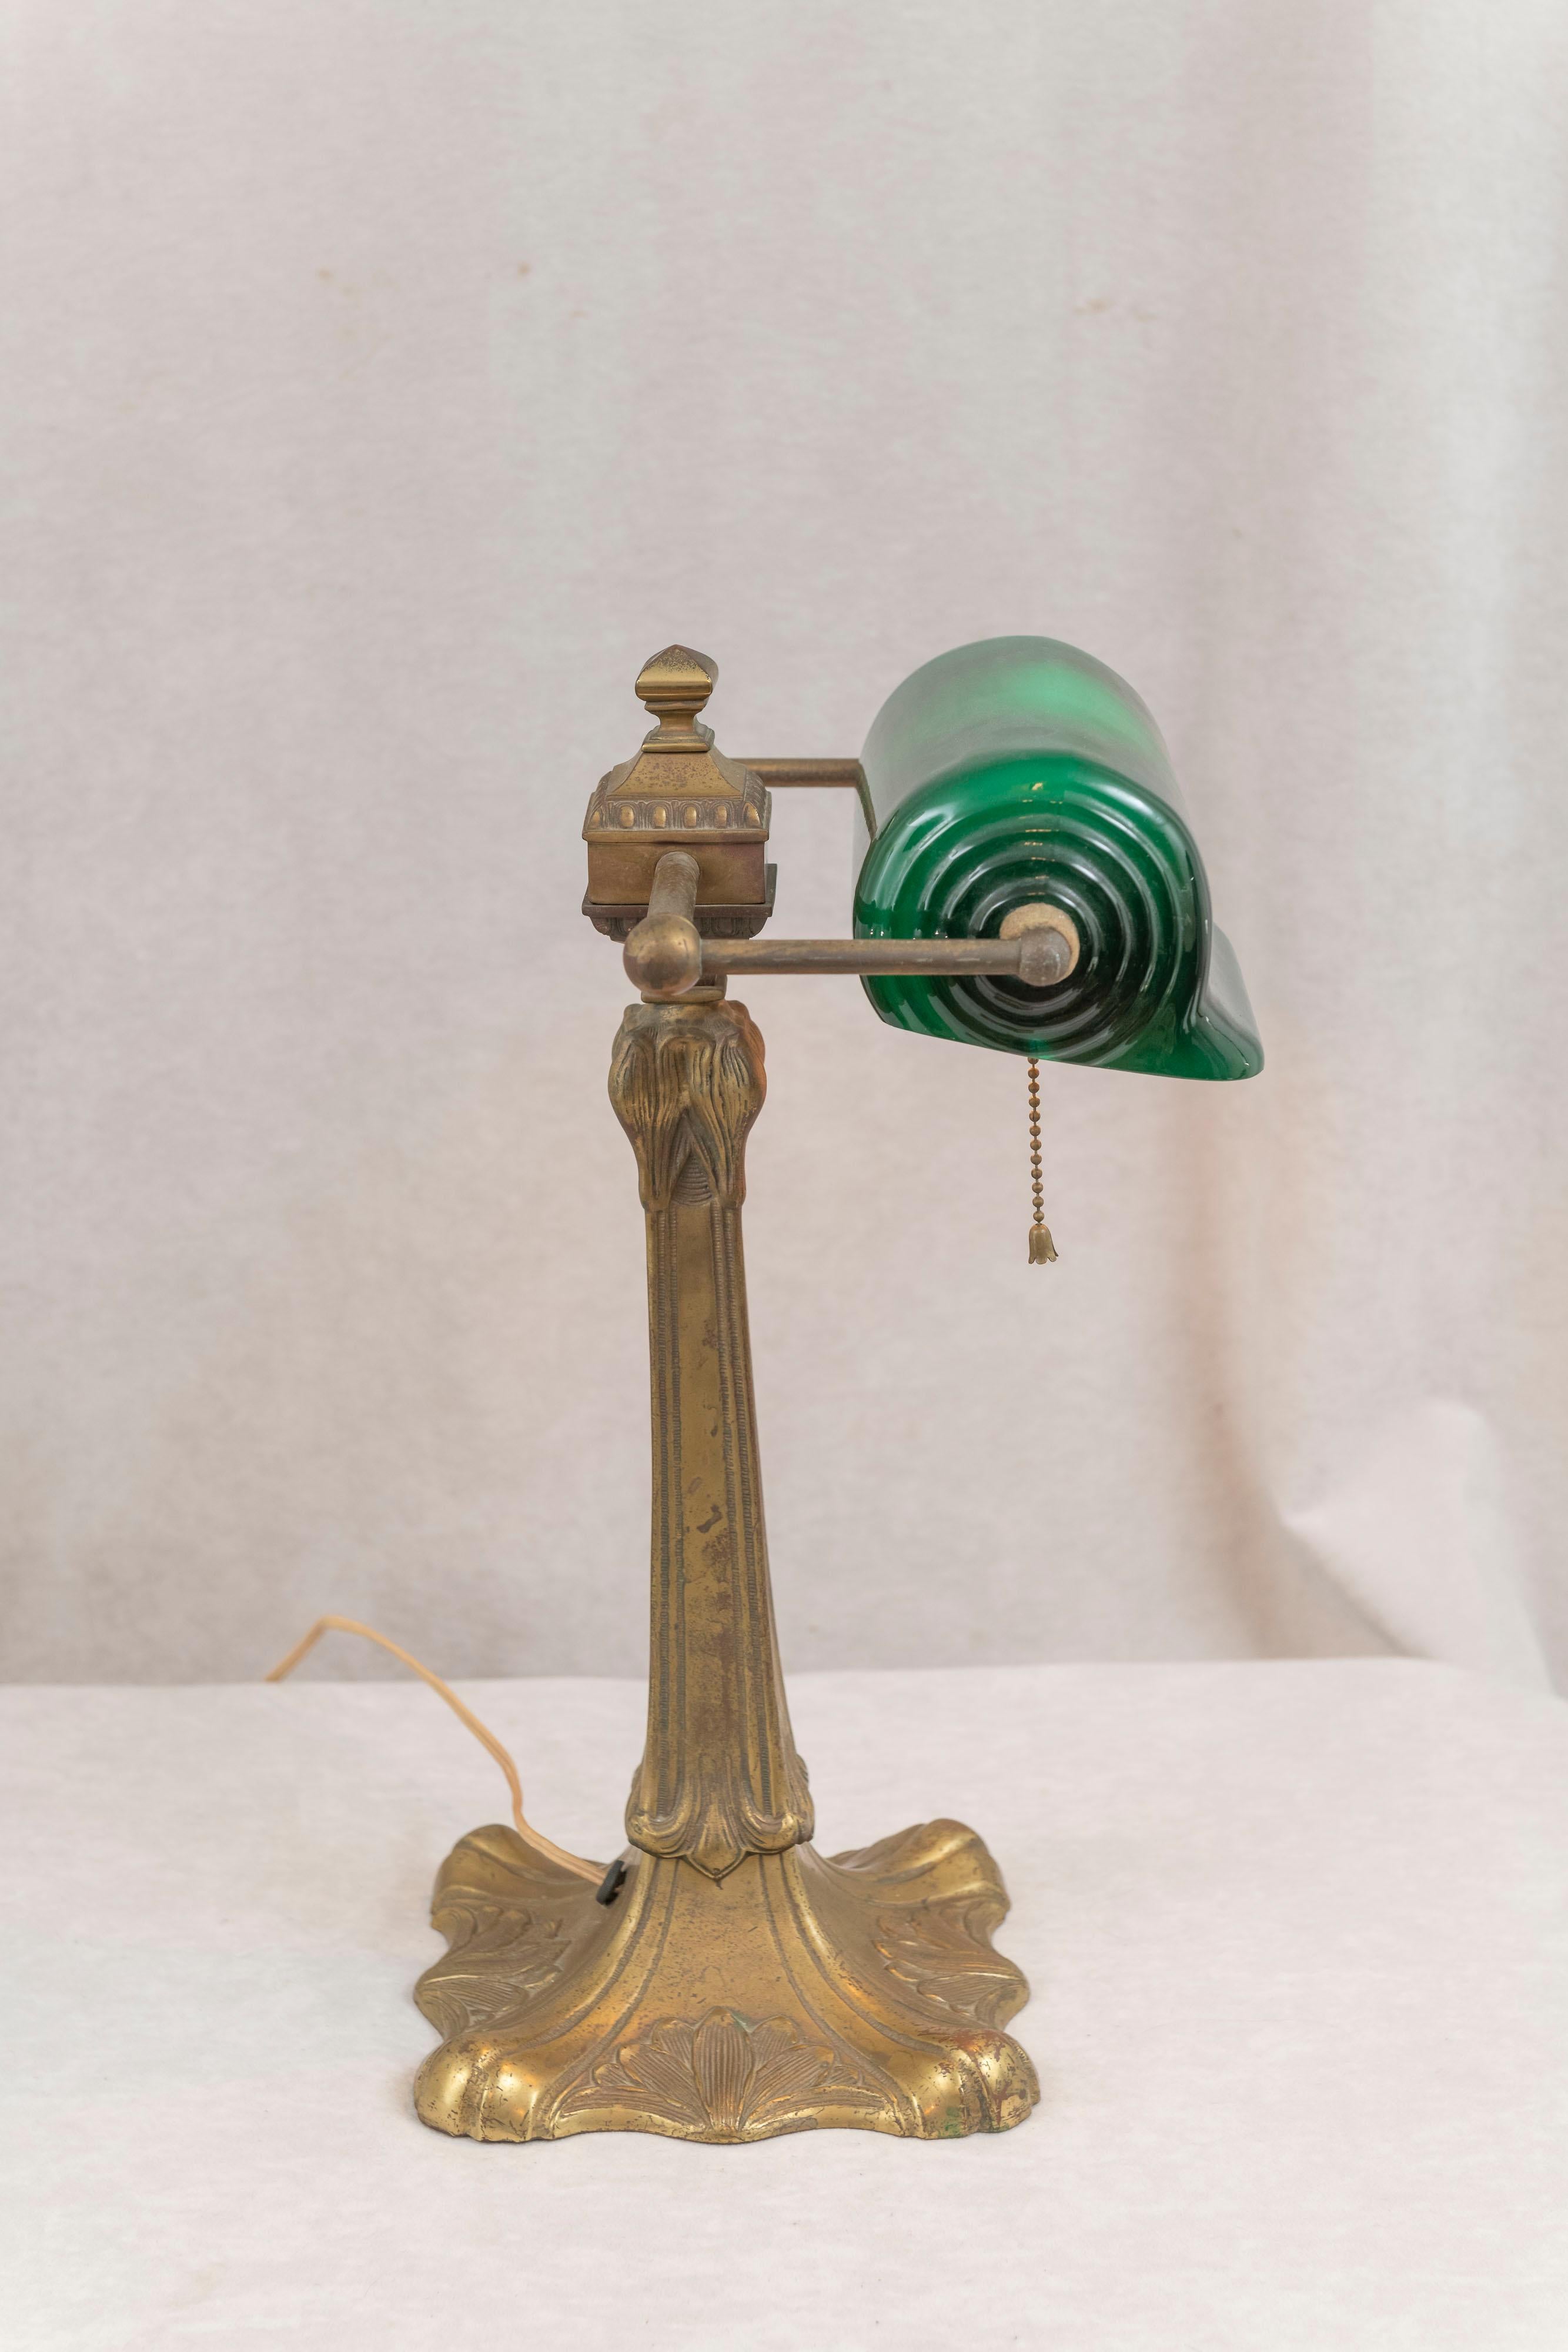 green glass bankers lamp